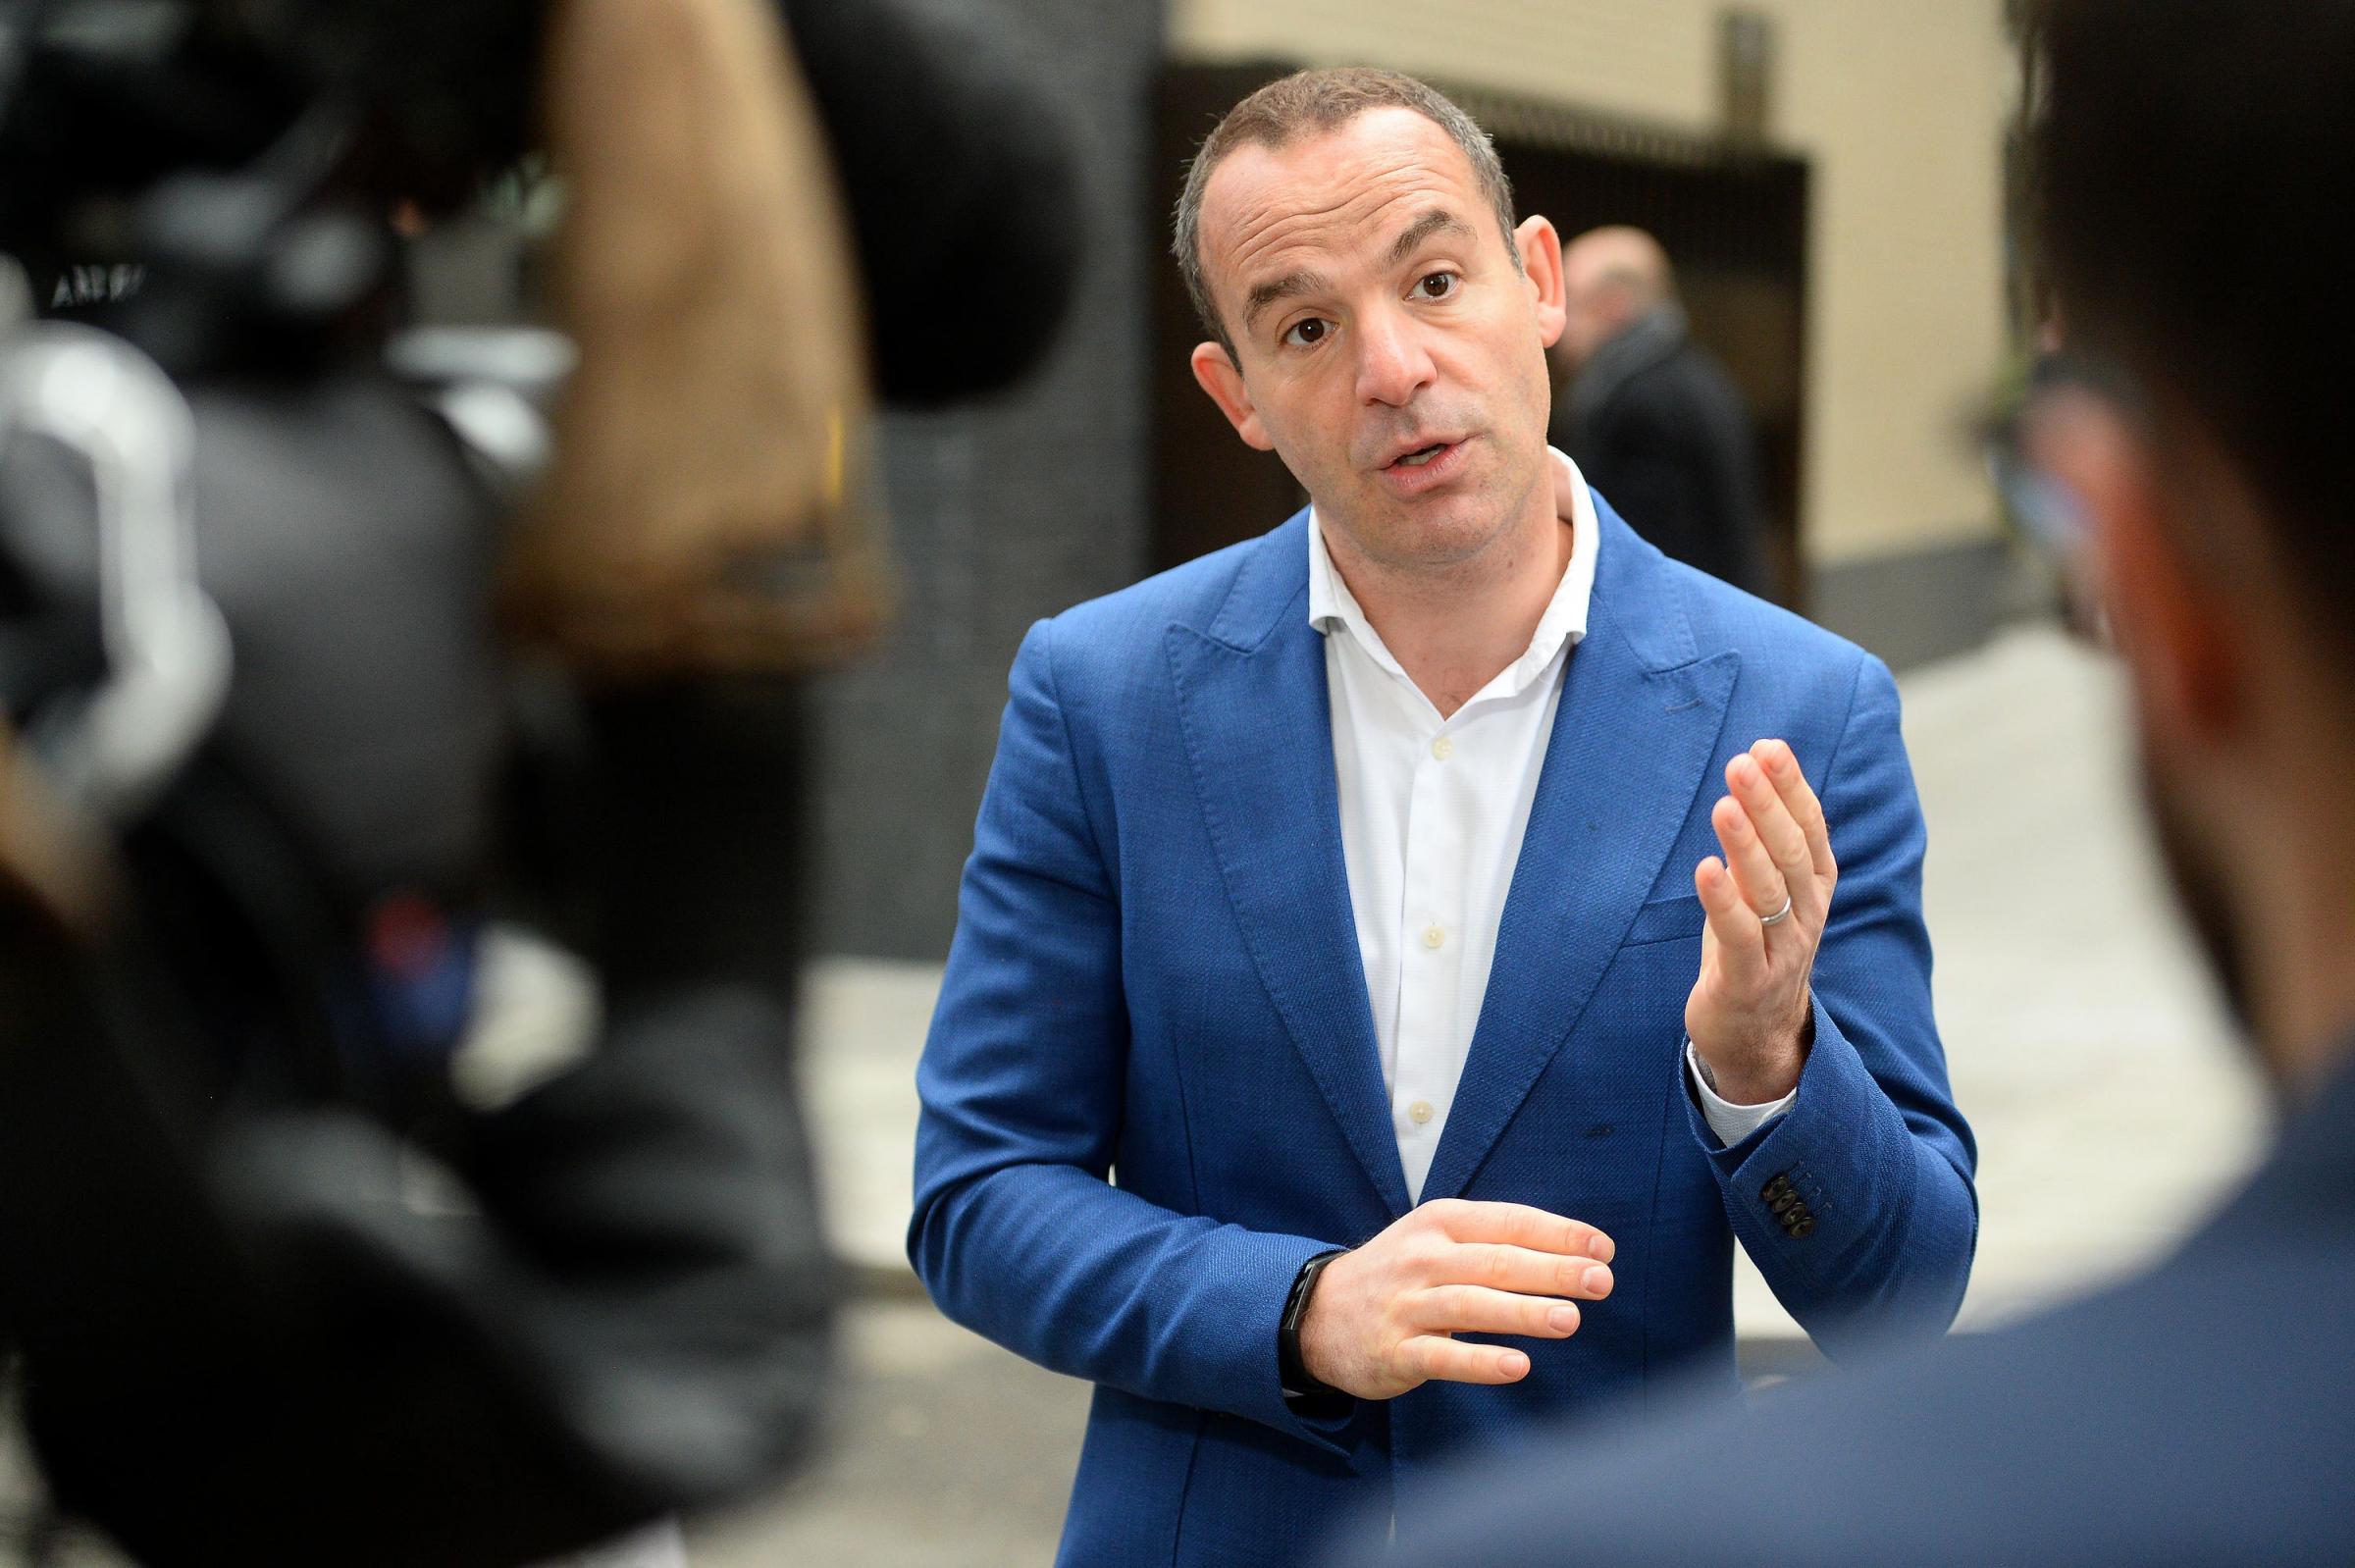 Martin Lewis warns of civil unrest over cost of living crisis